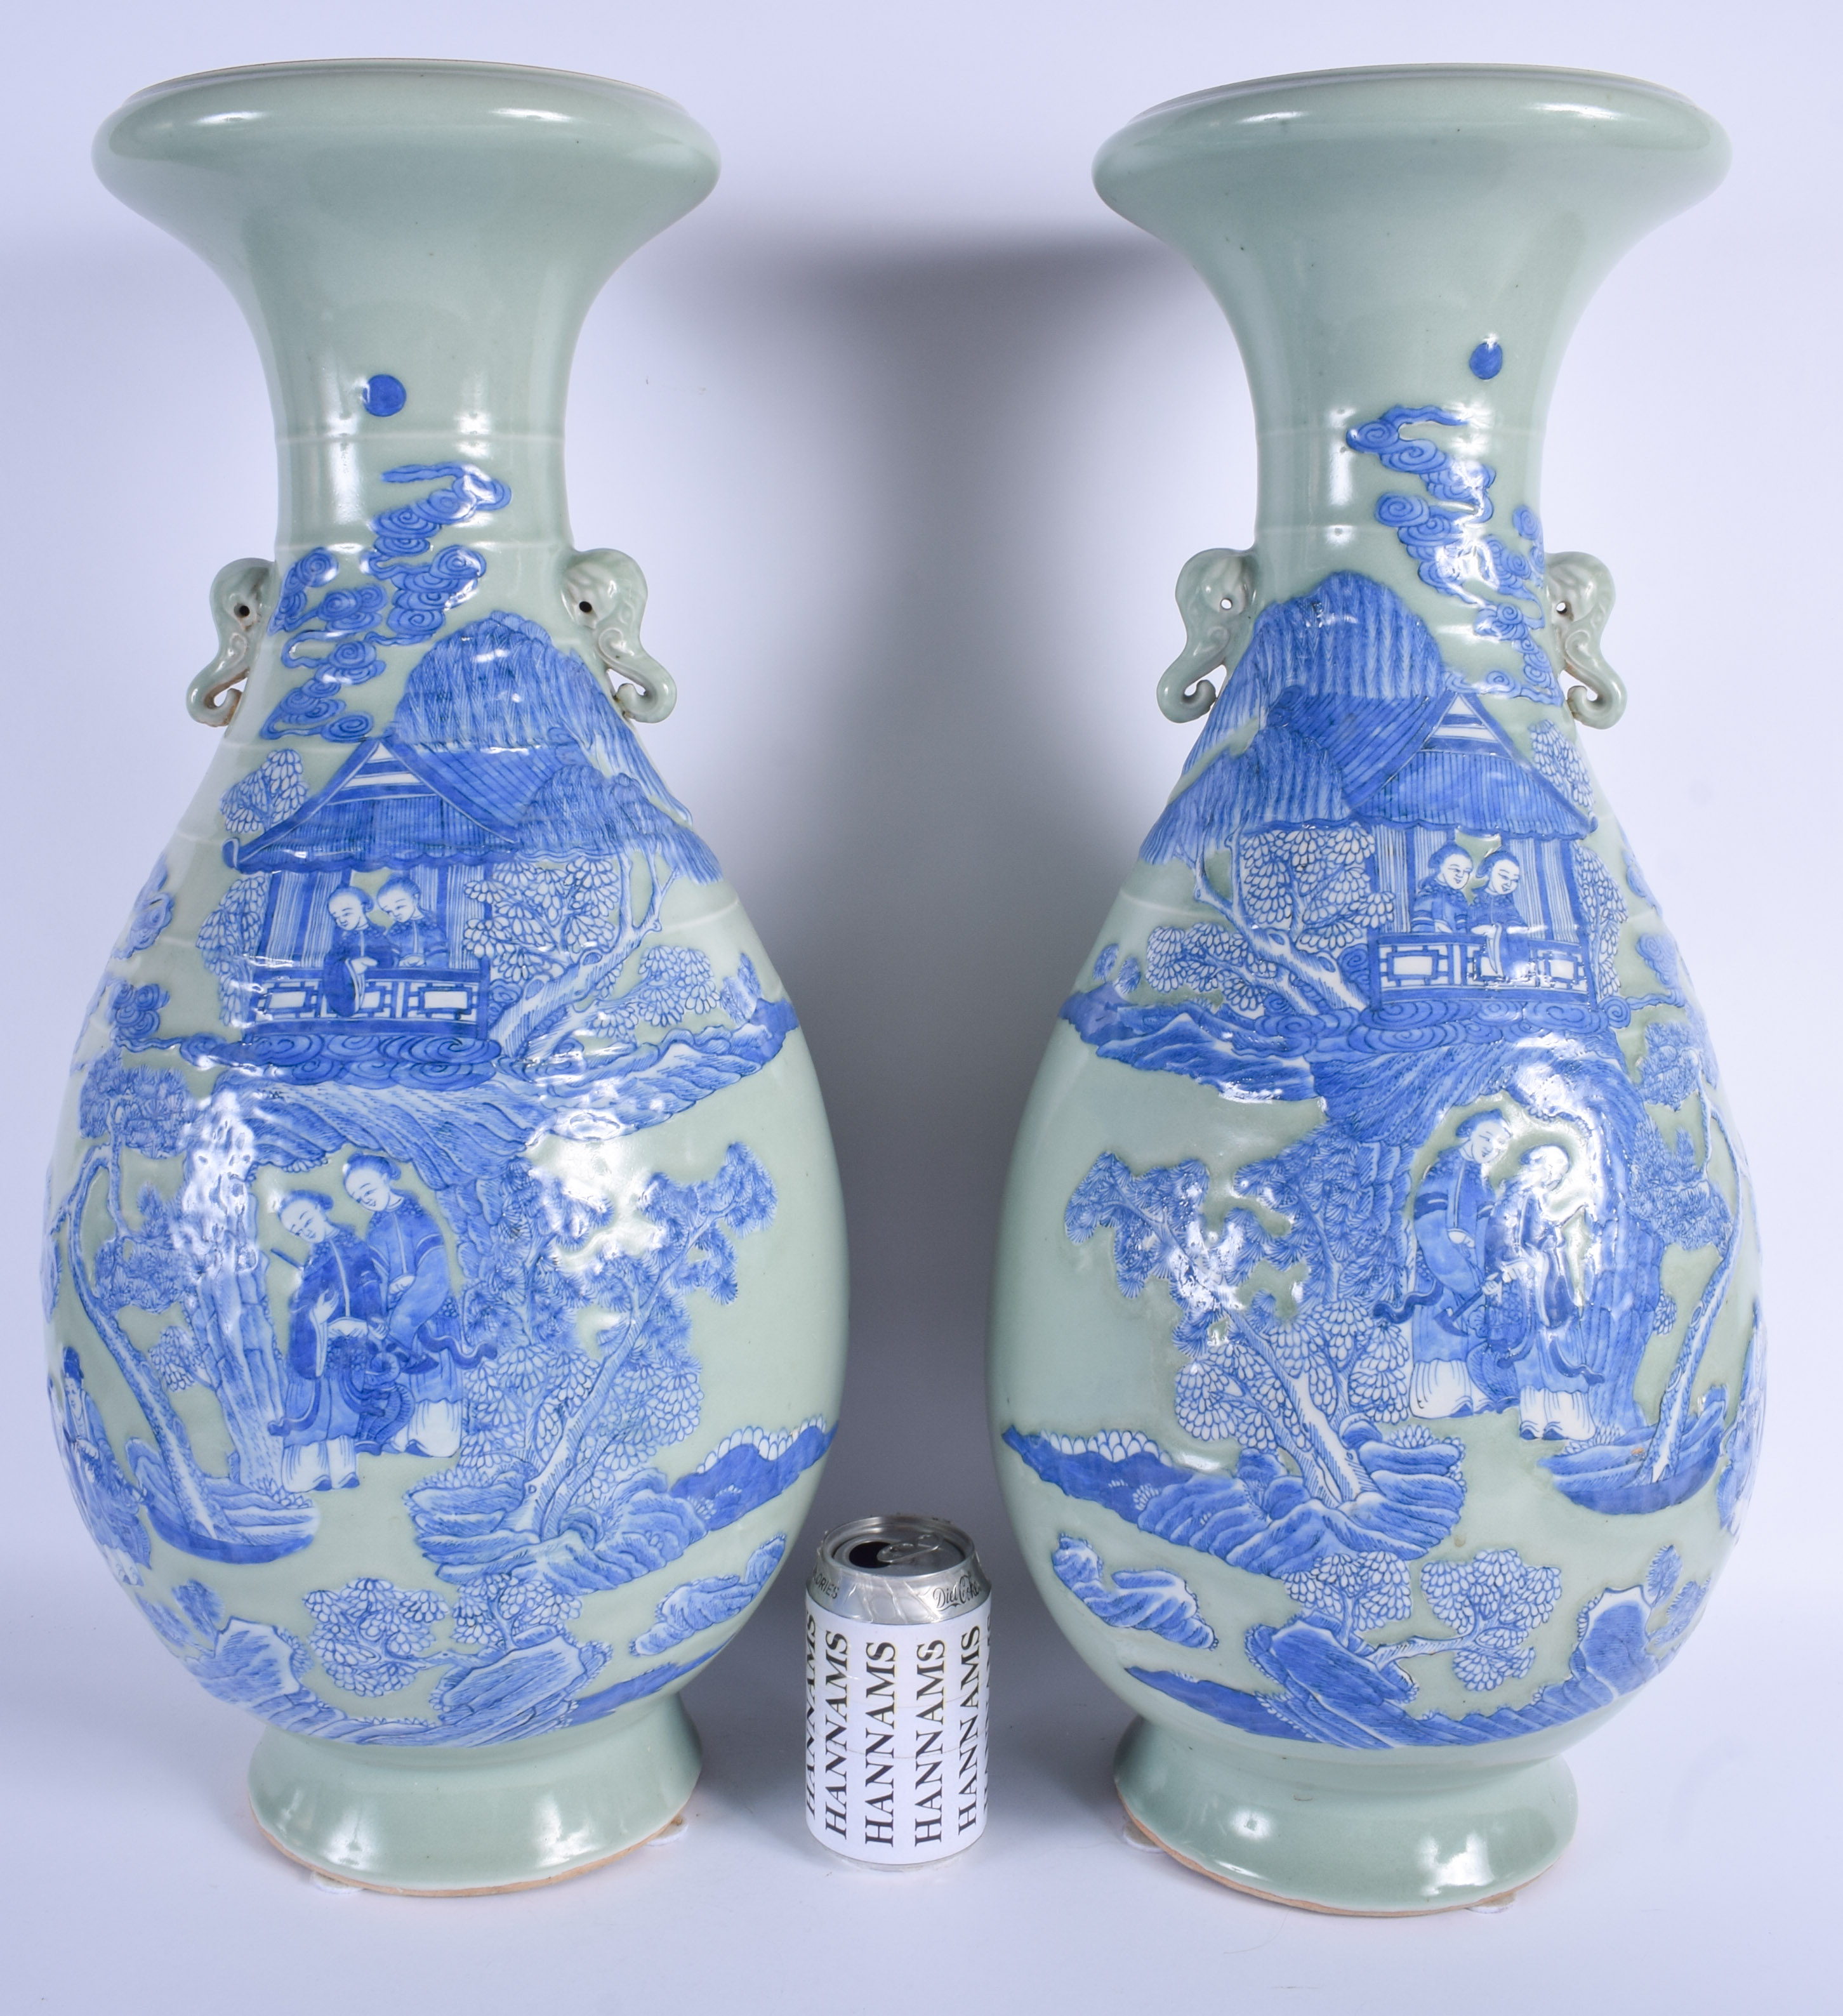 A LARGE PAIR OF 19TH CENTURY CHINESE CELADON BLUE AND WHITE VASES Late Qing, painted with figures in